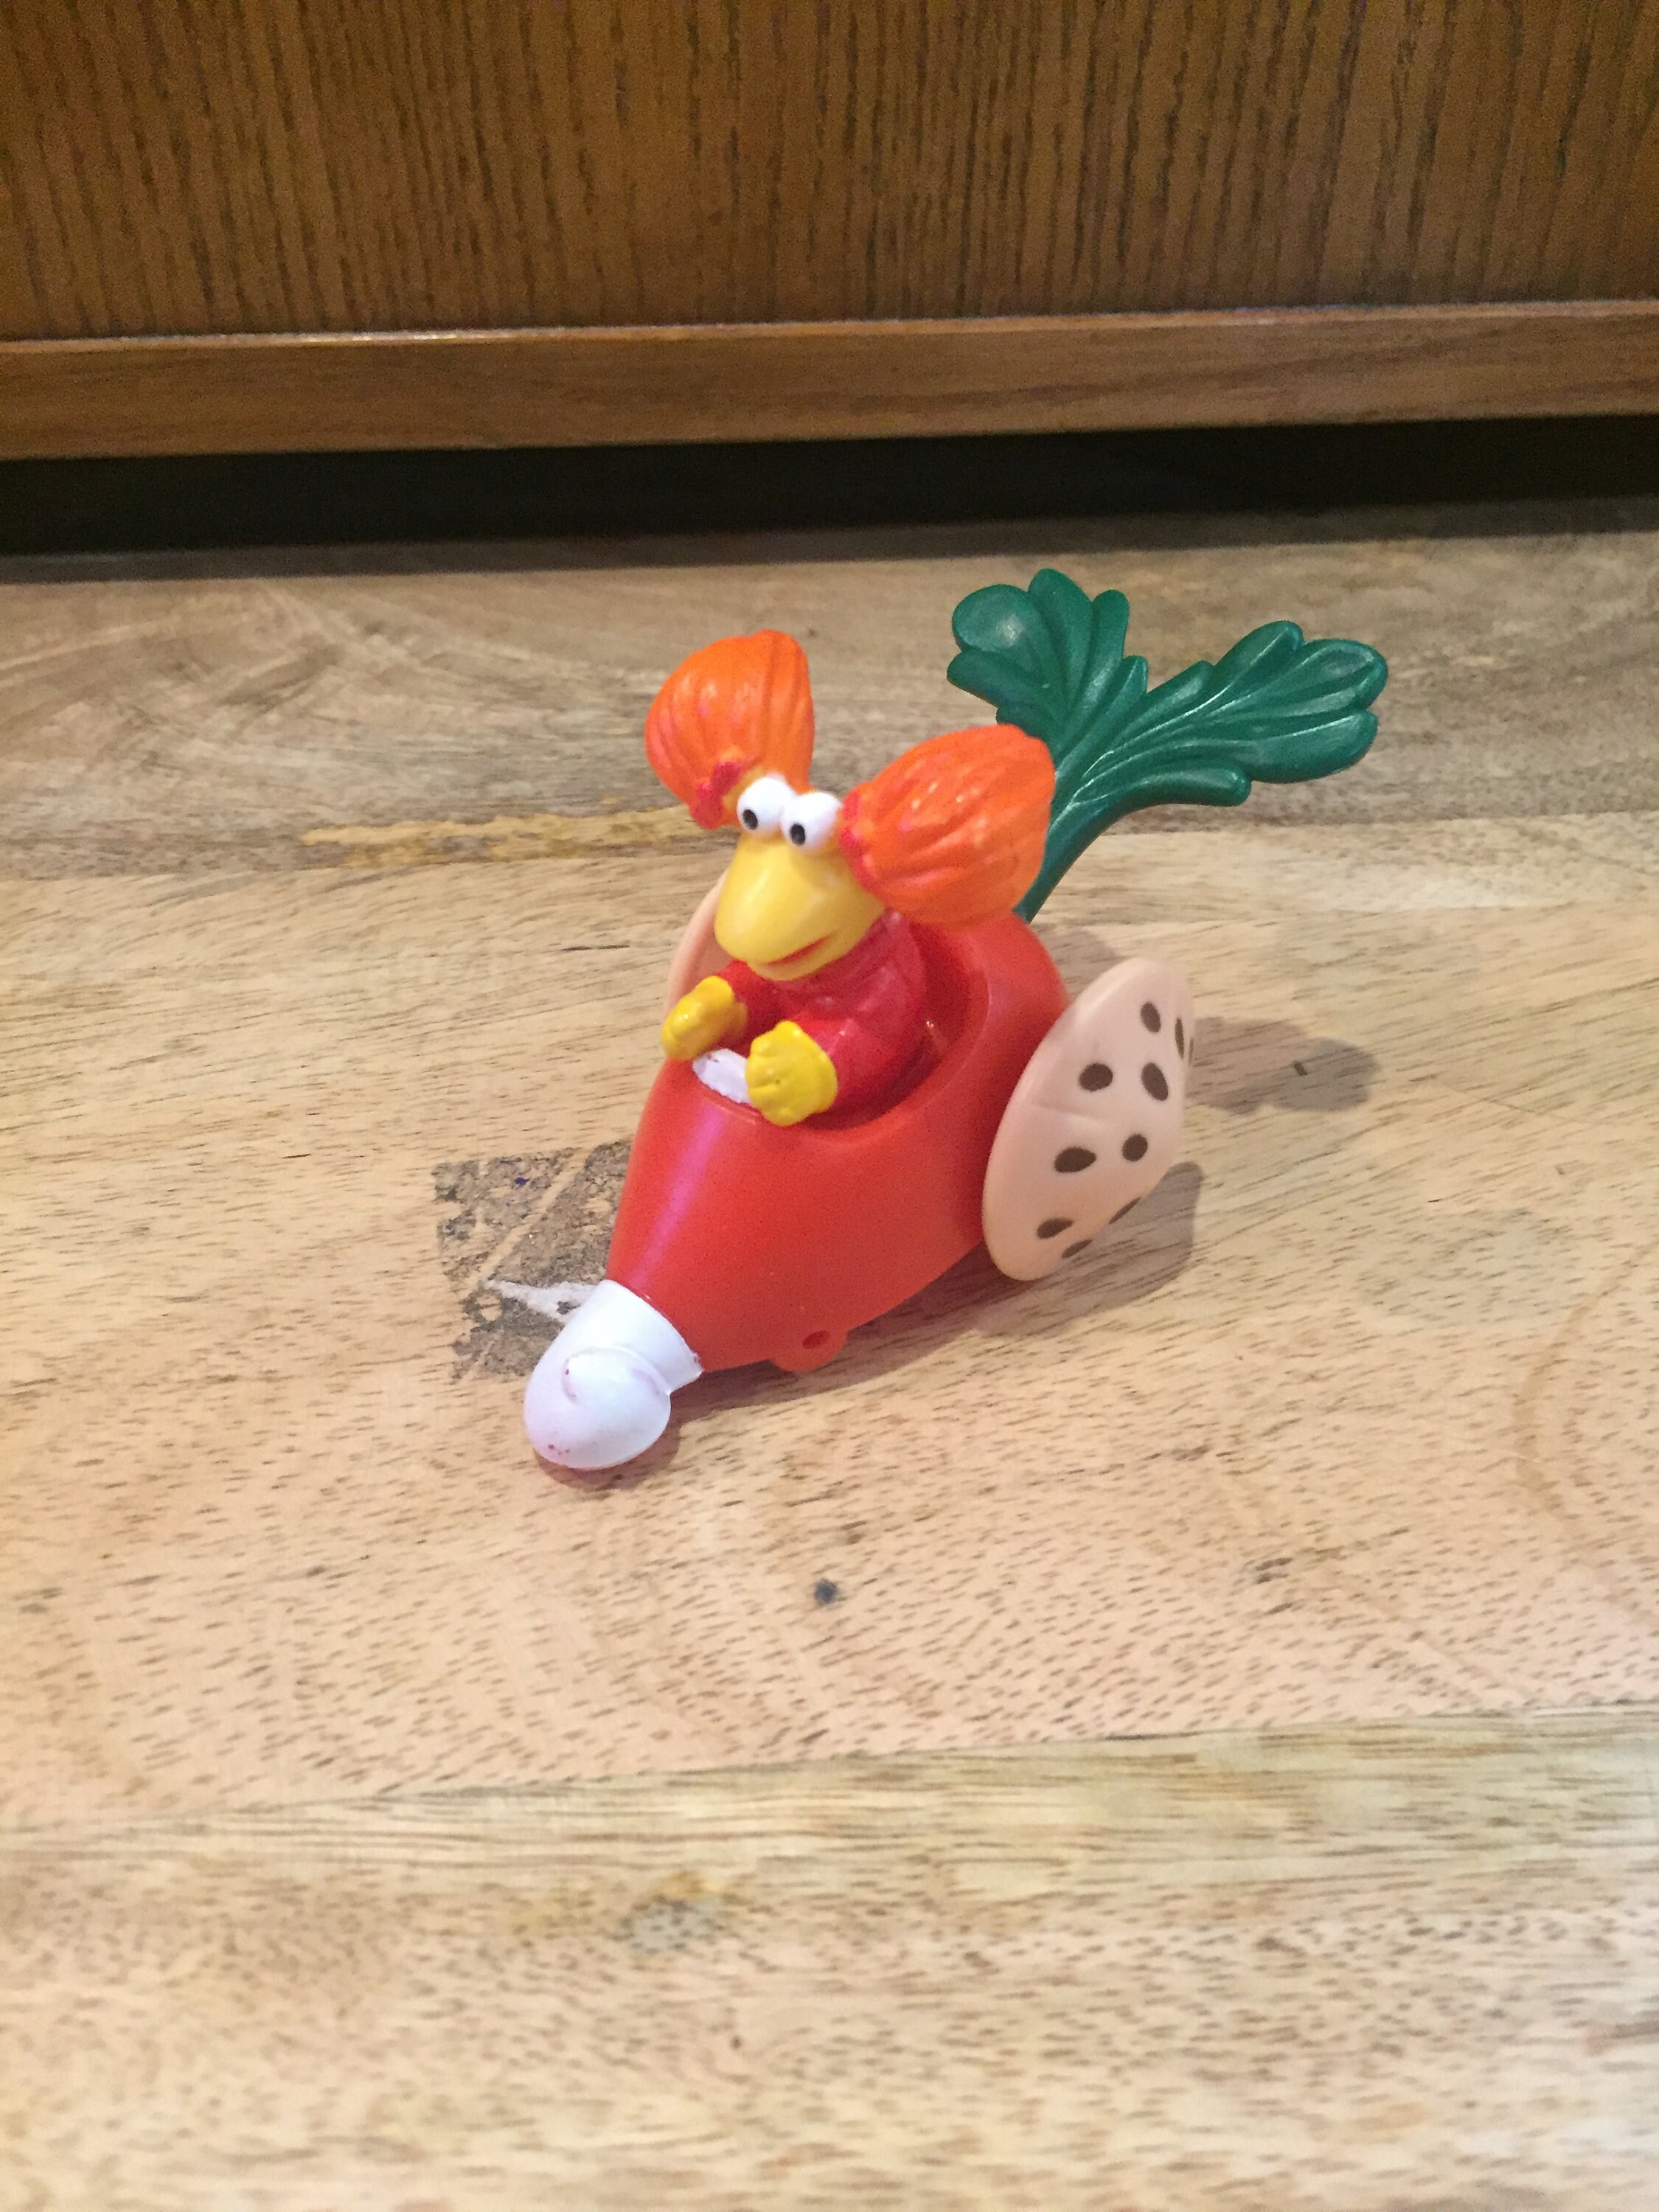 1987 Fraggle Rock McDonalds Happy Meal Toy Gobo in Carrot Car 